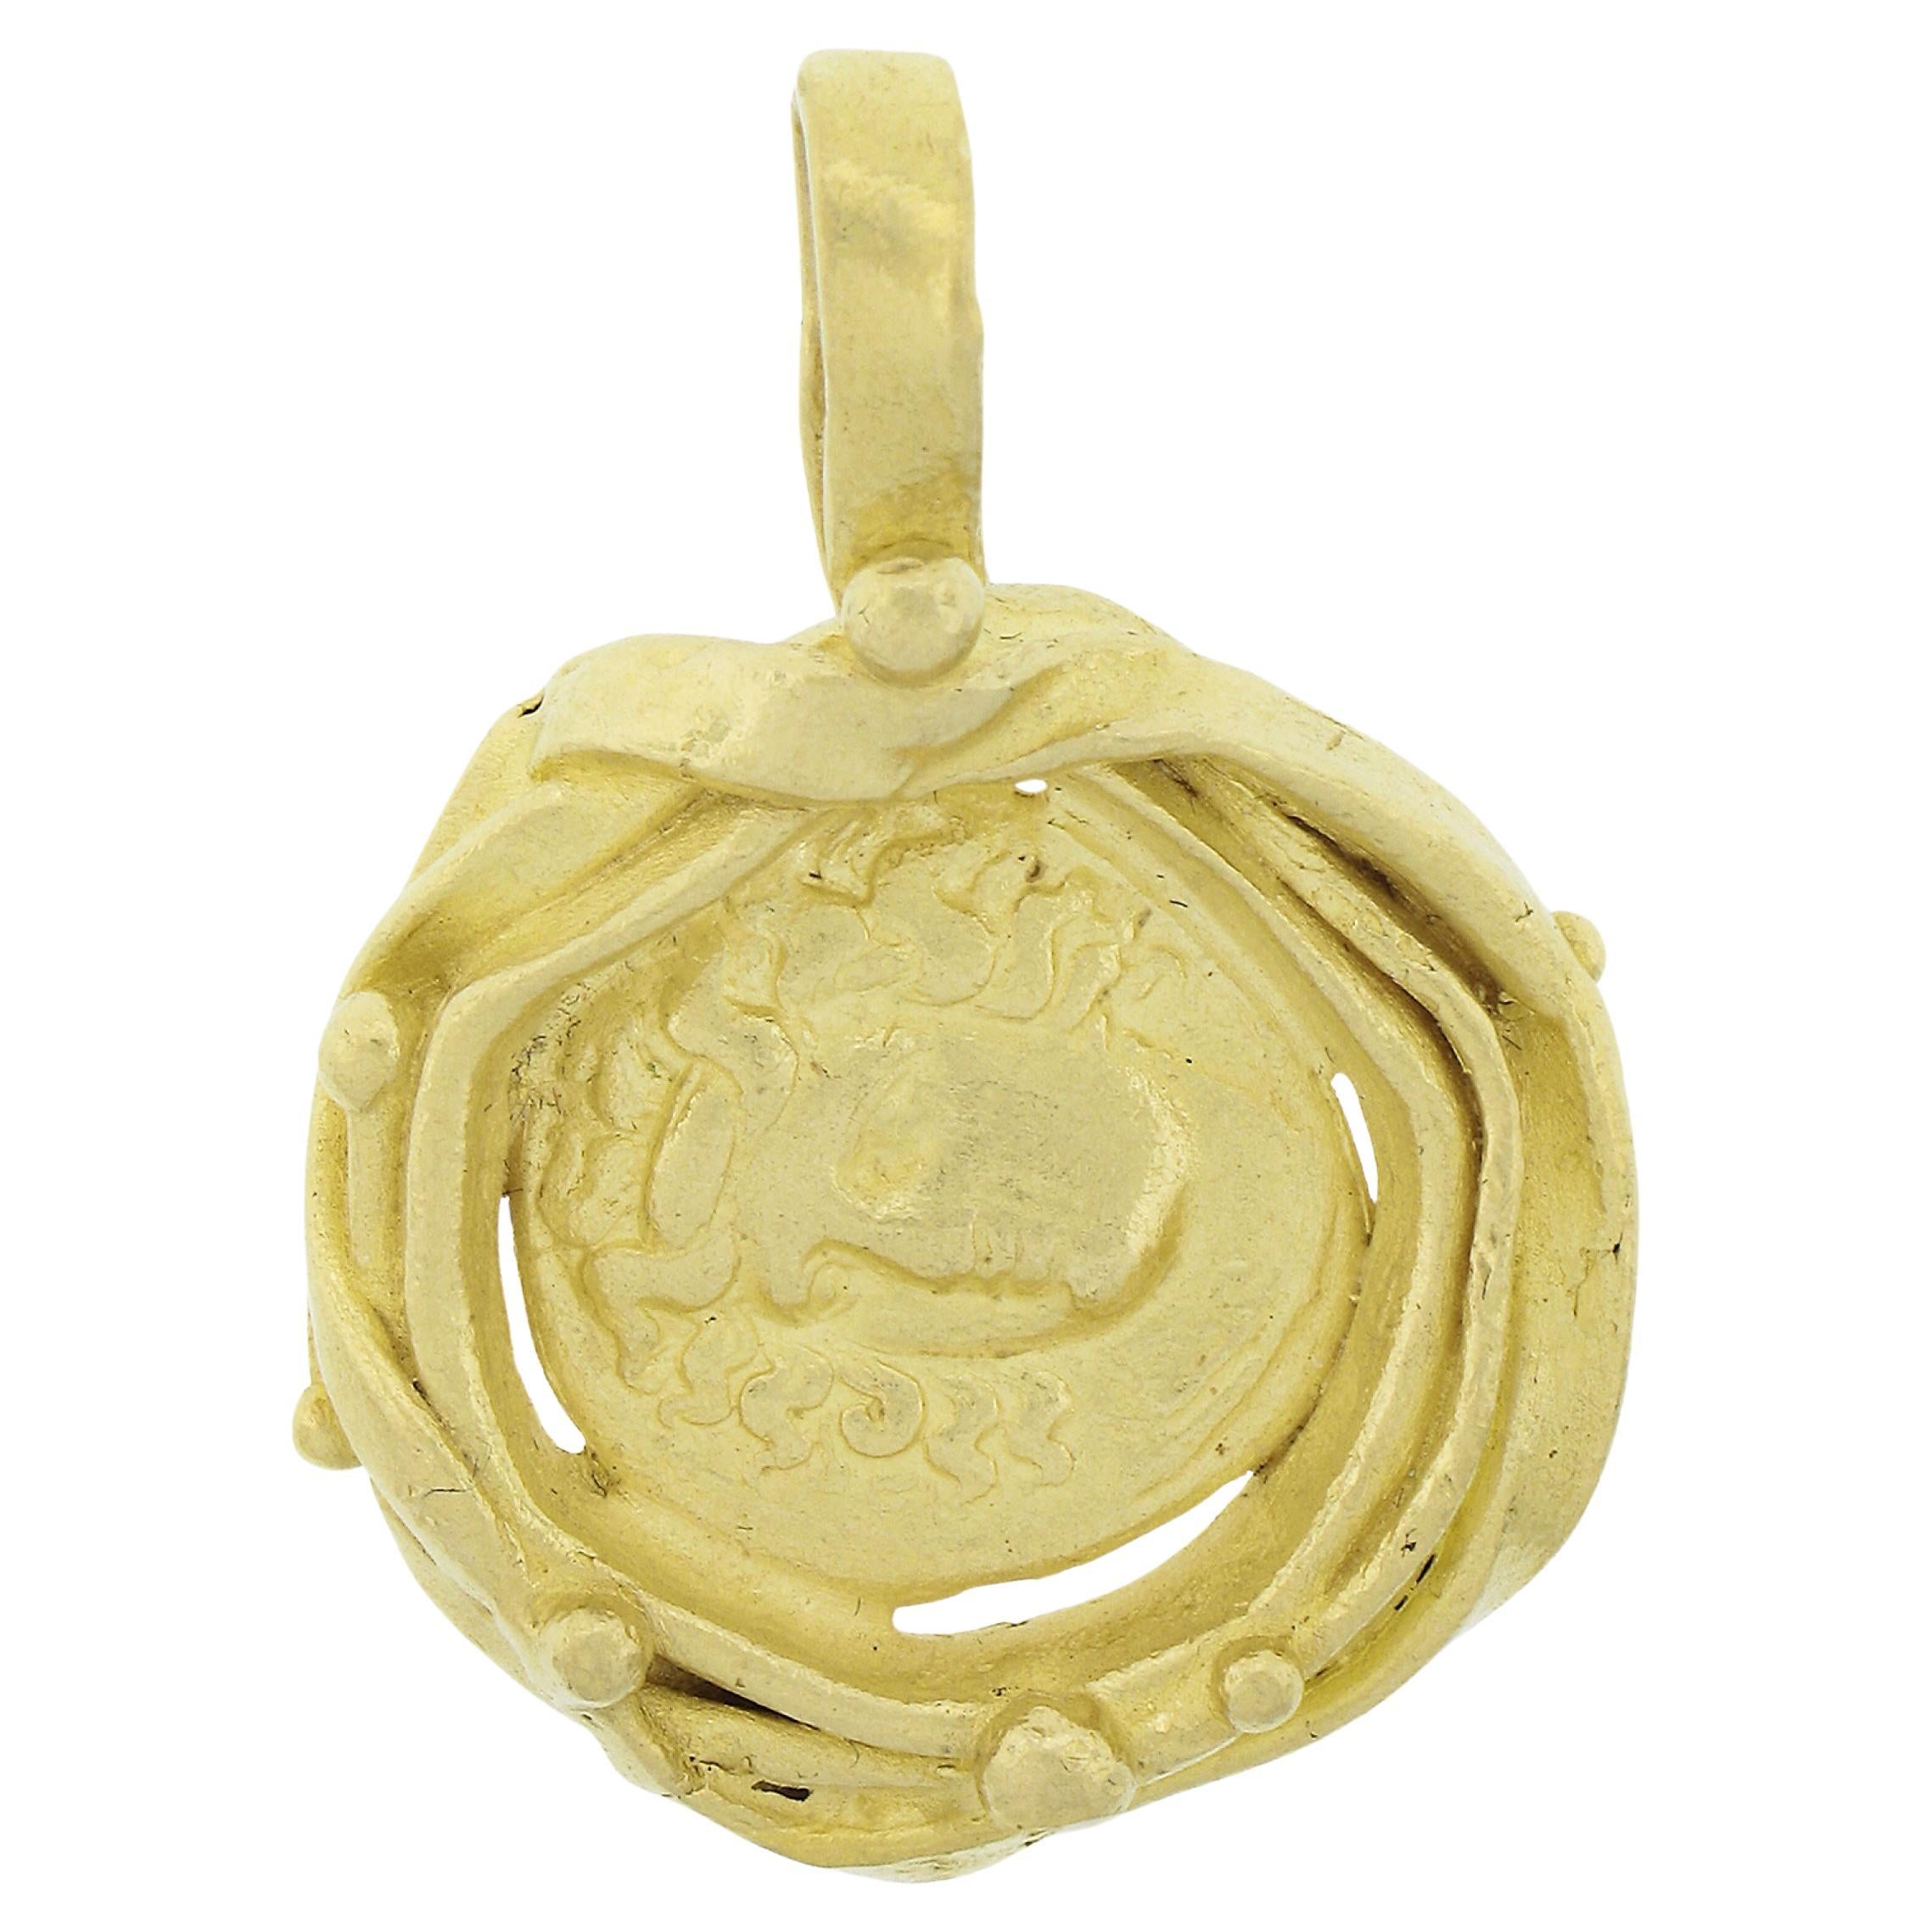 Denise Roberge 22k Yellow Gold Ancient Coin Textured & Bead Work Charm Pendant For Sale